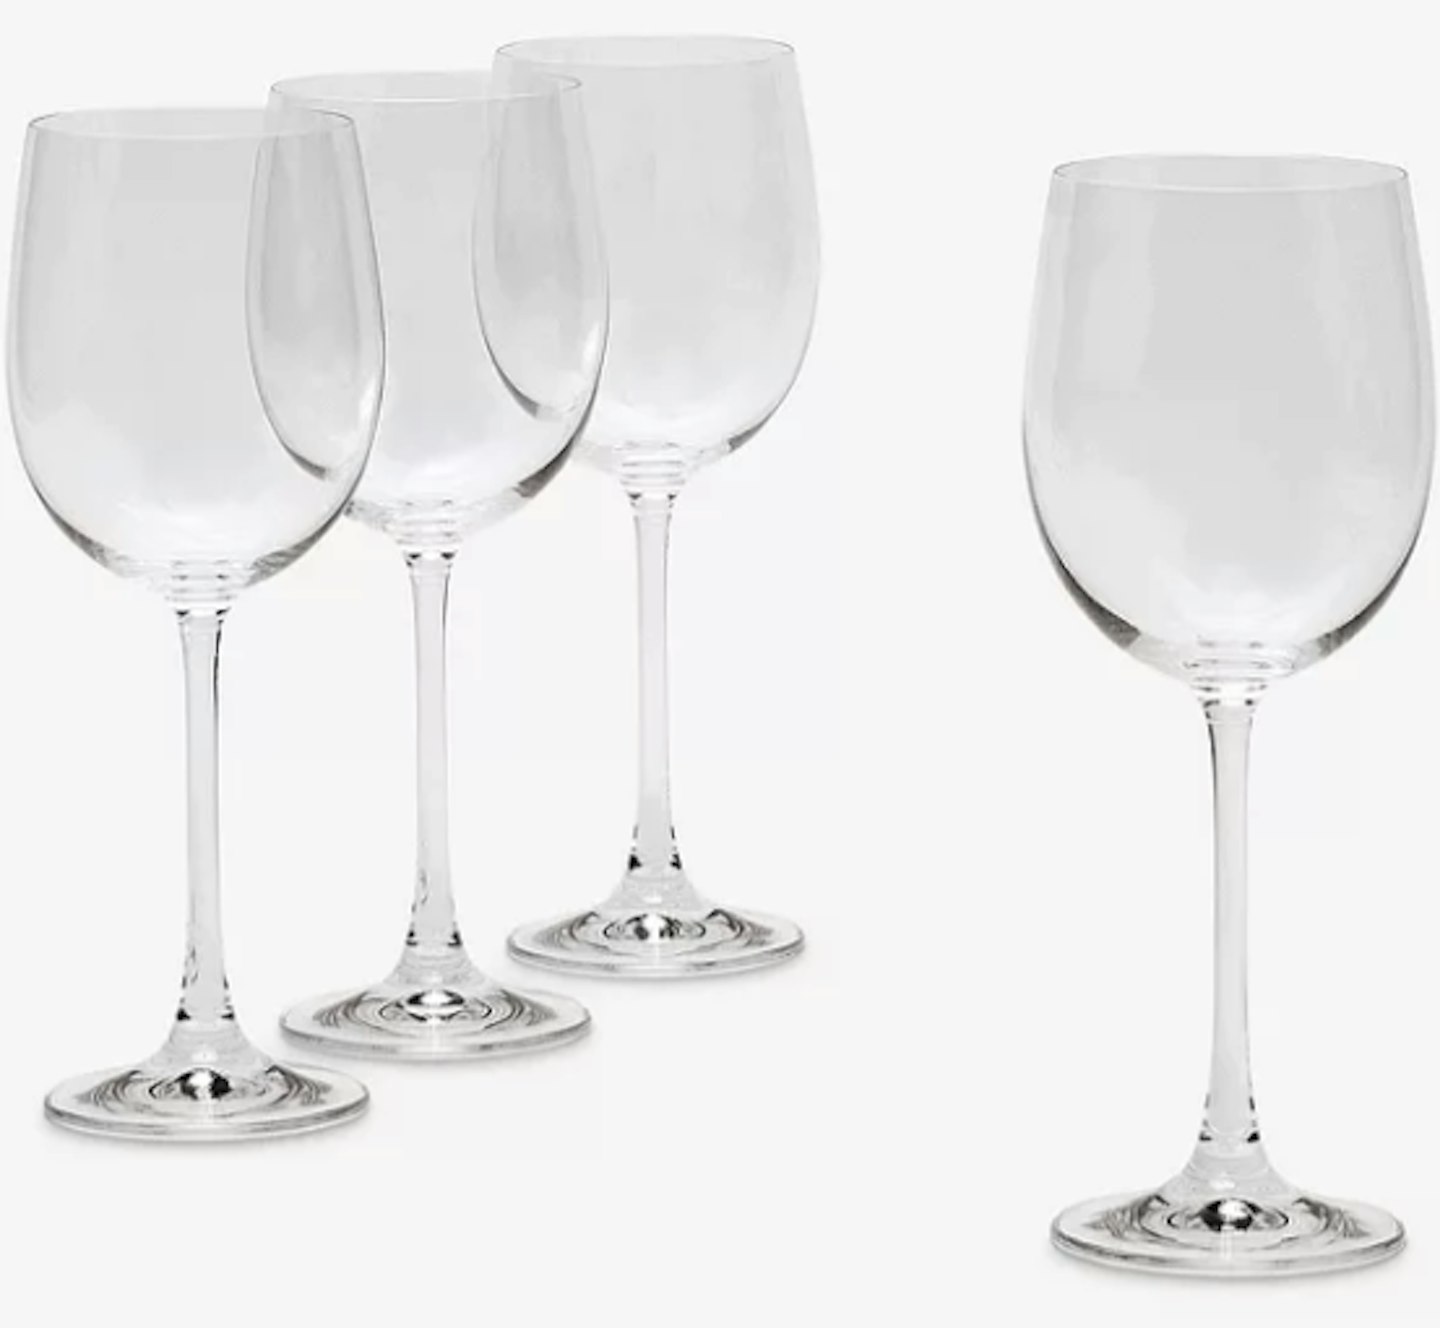 How To Choose The Best White Wine Glasses